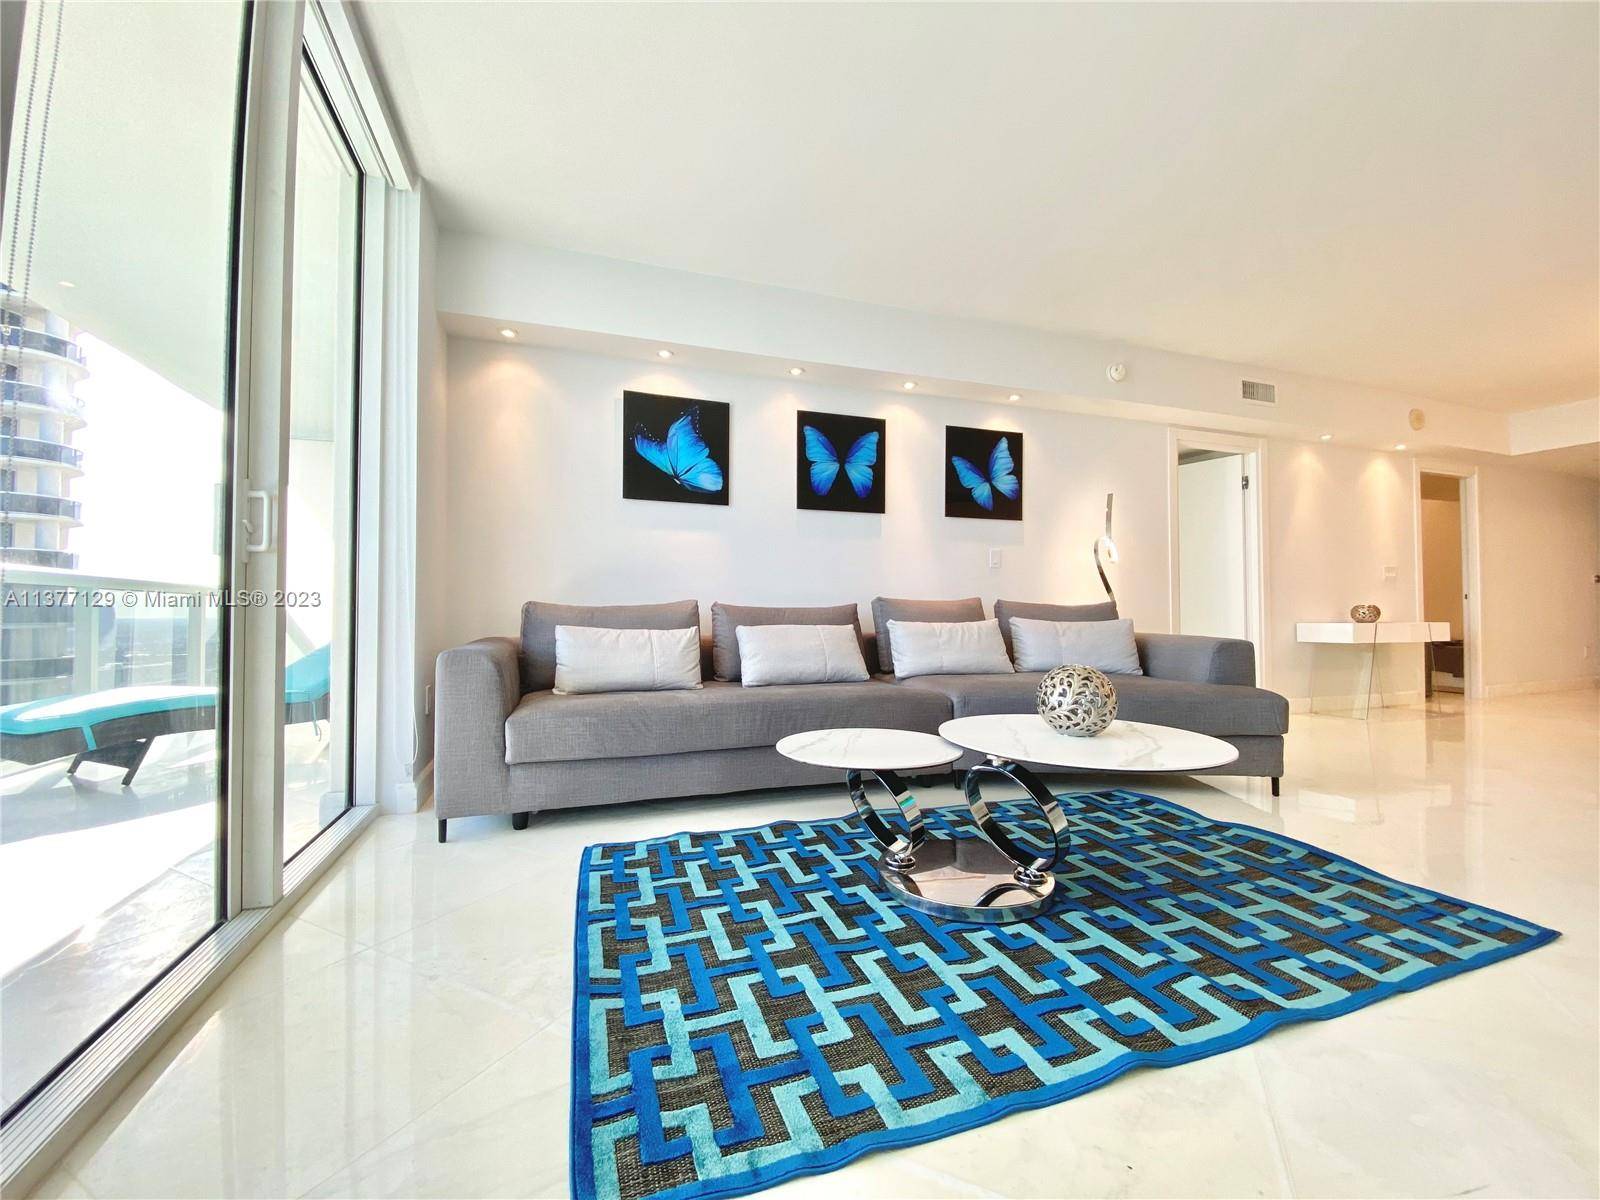 BEAUTIFUL AND FULLY FURNISHED 2 BD PLUS DEN, 3 FULL BATHS APARTMENT IN THE FAMOUS BEACH CLUB TWO.